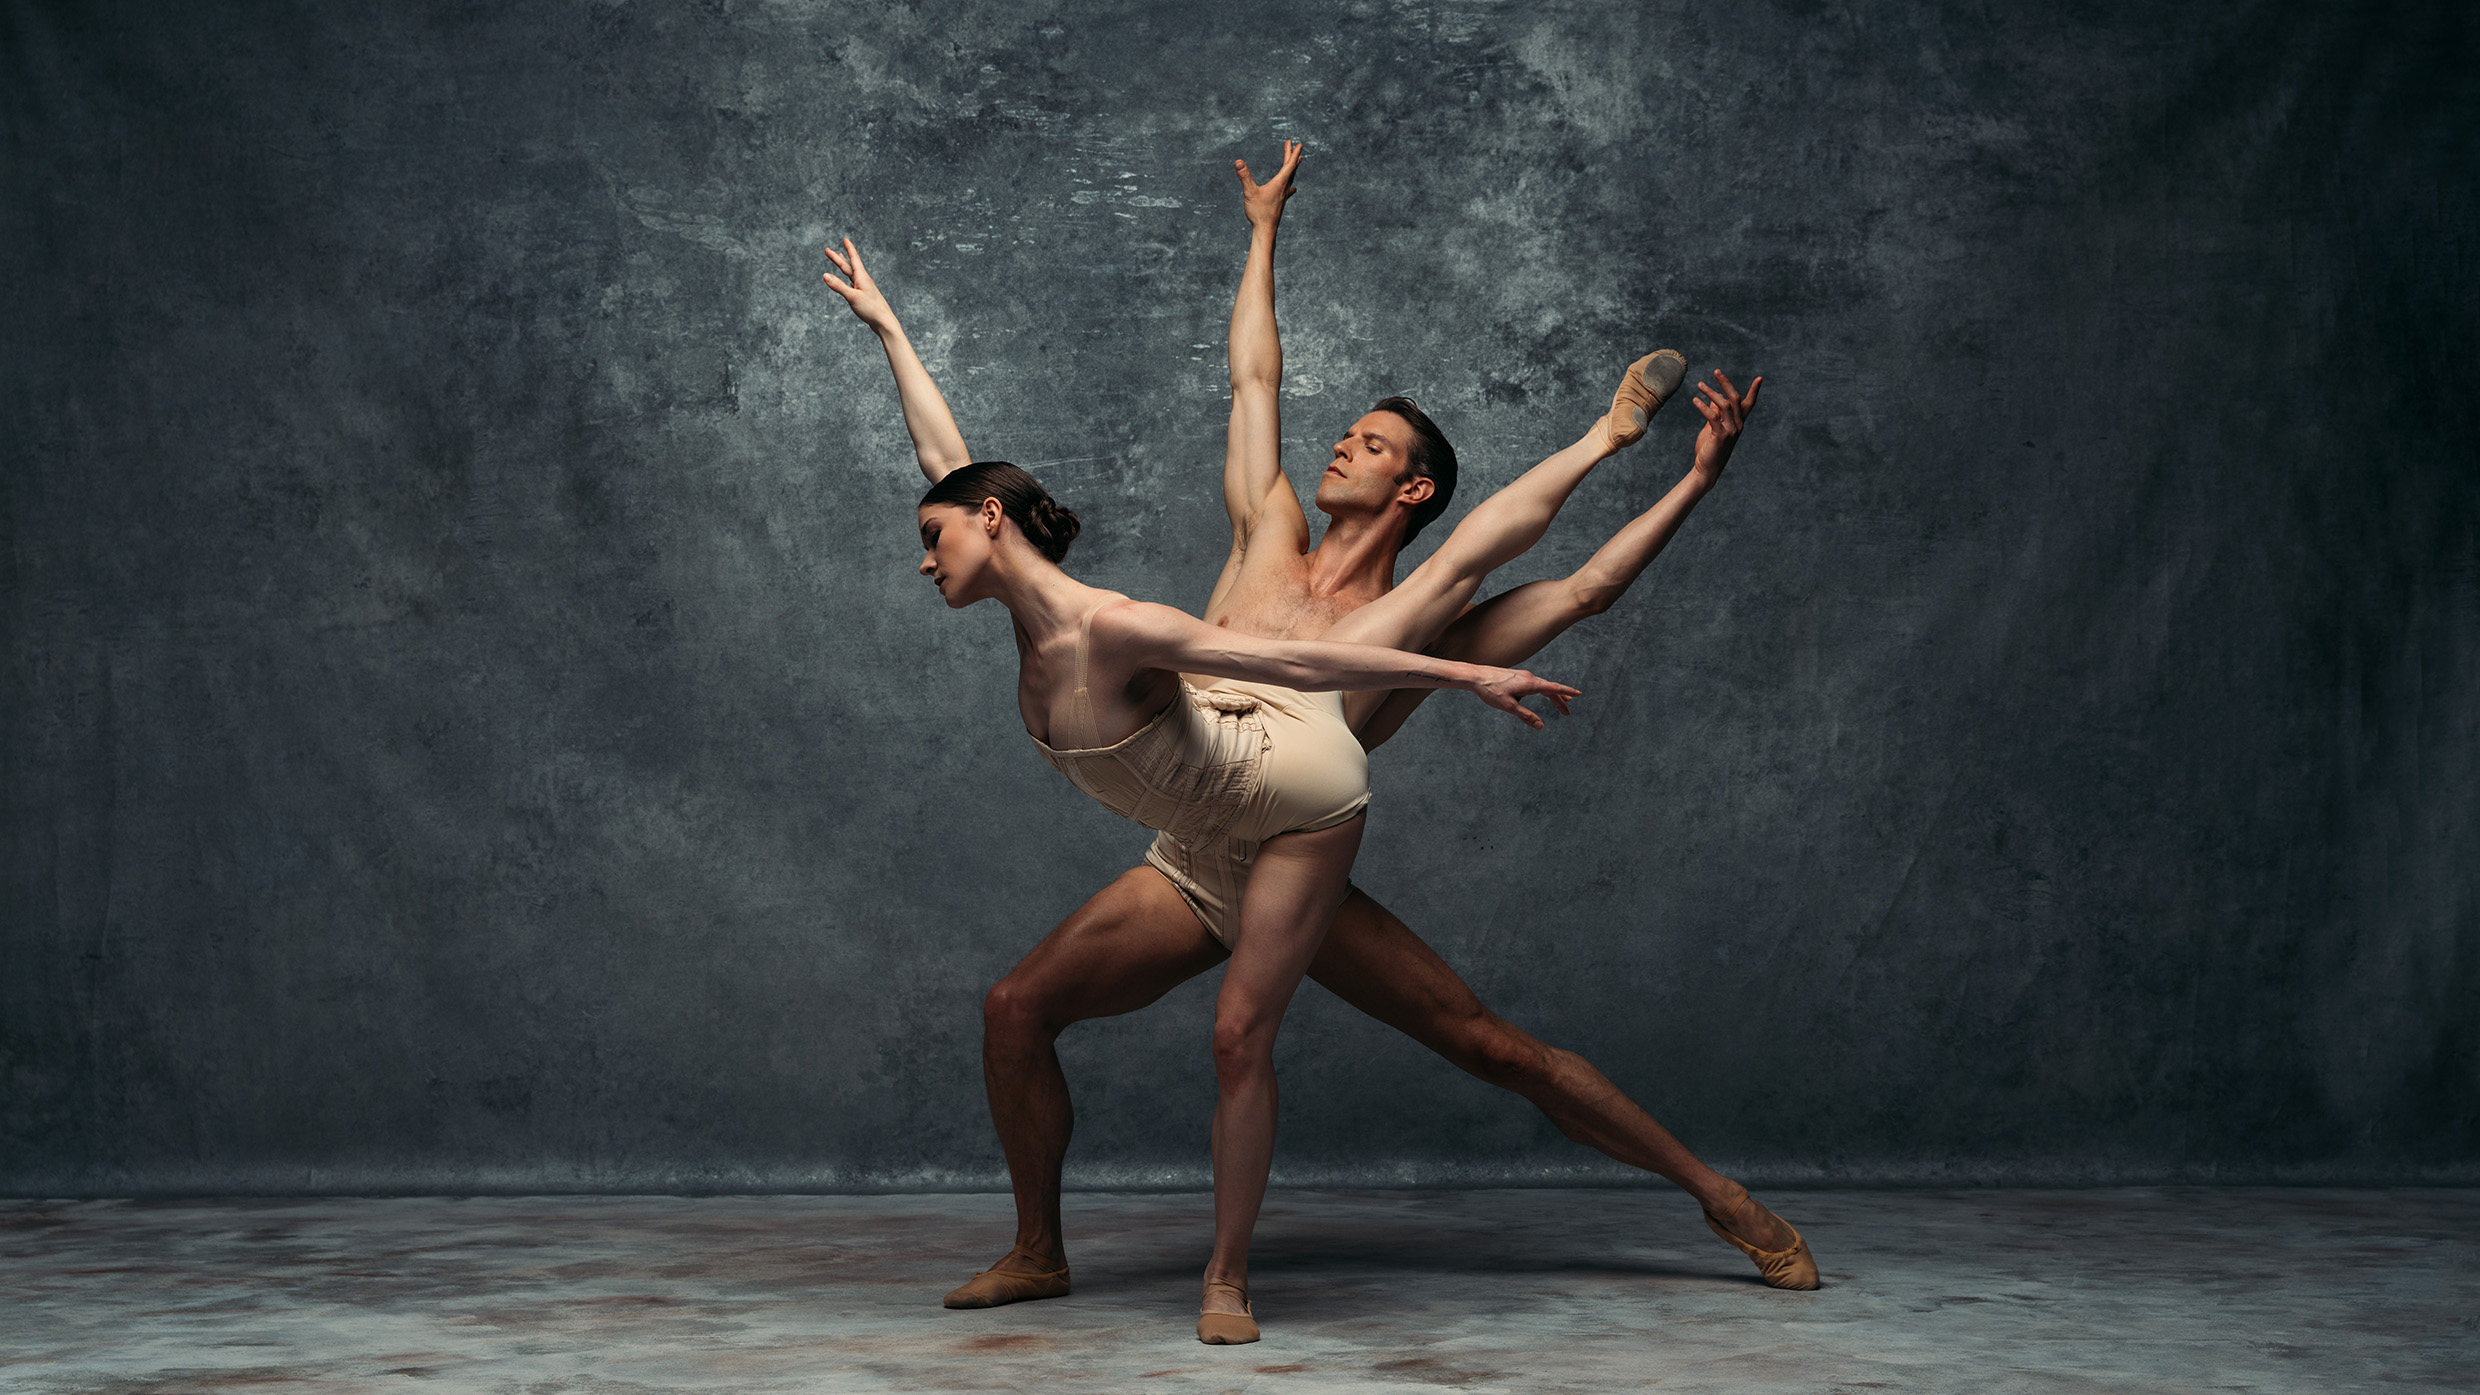 Works And Process American Ballet Theatre The Art Of Storytelling The Guggenheim Museums And